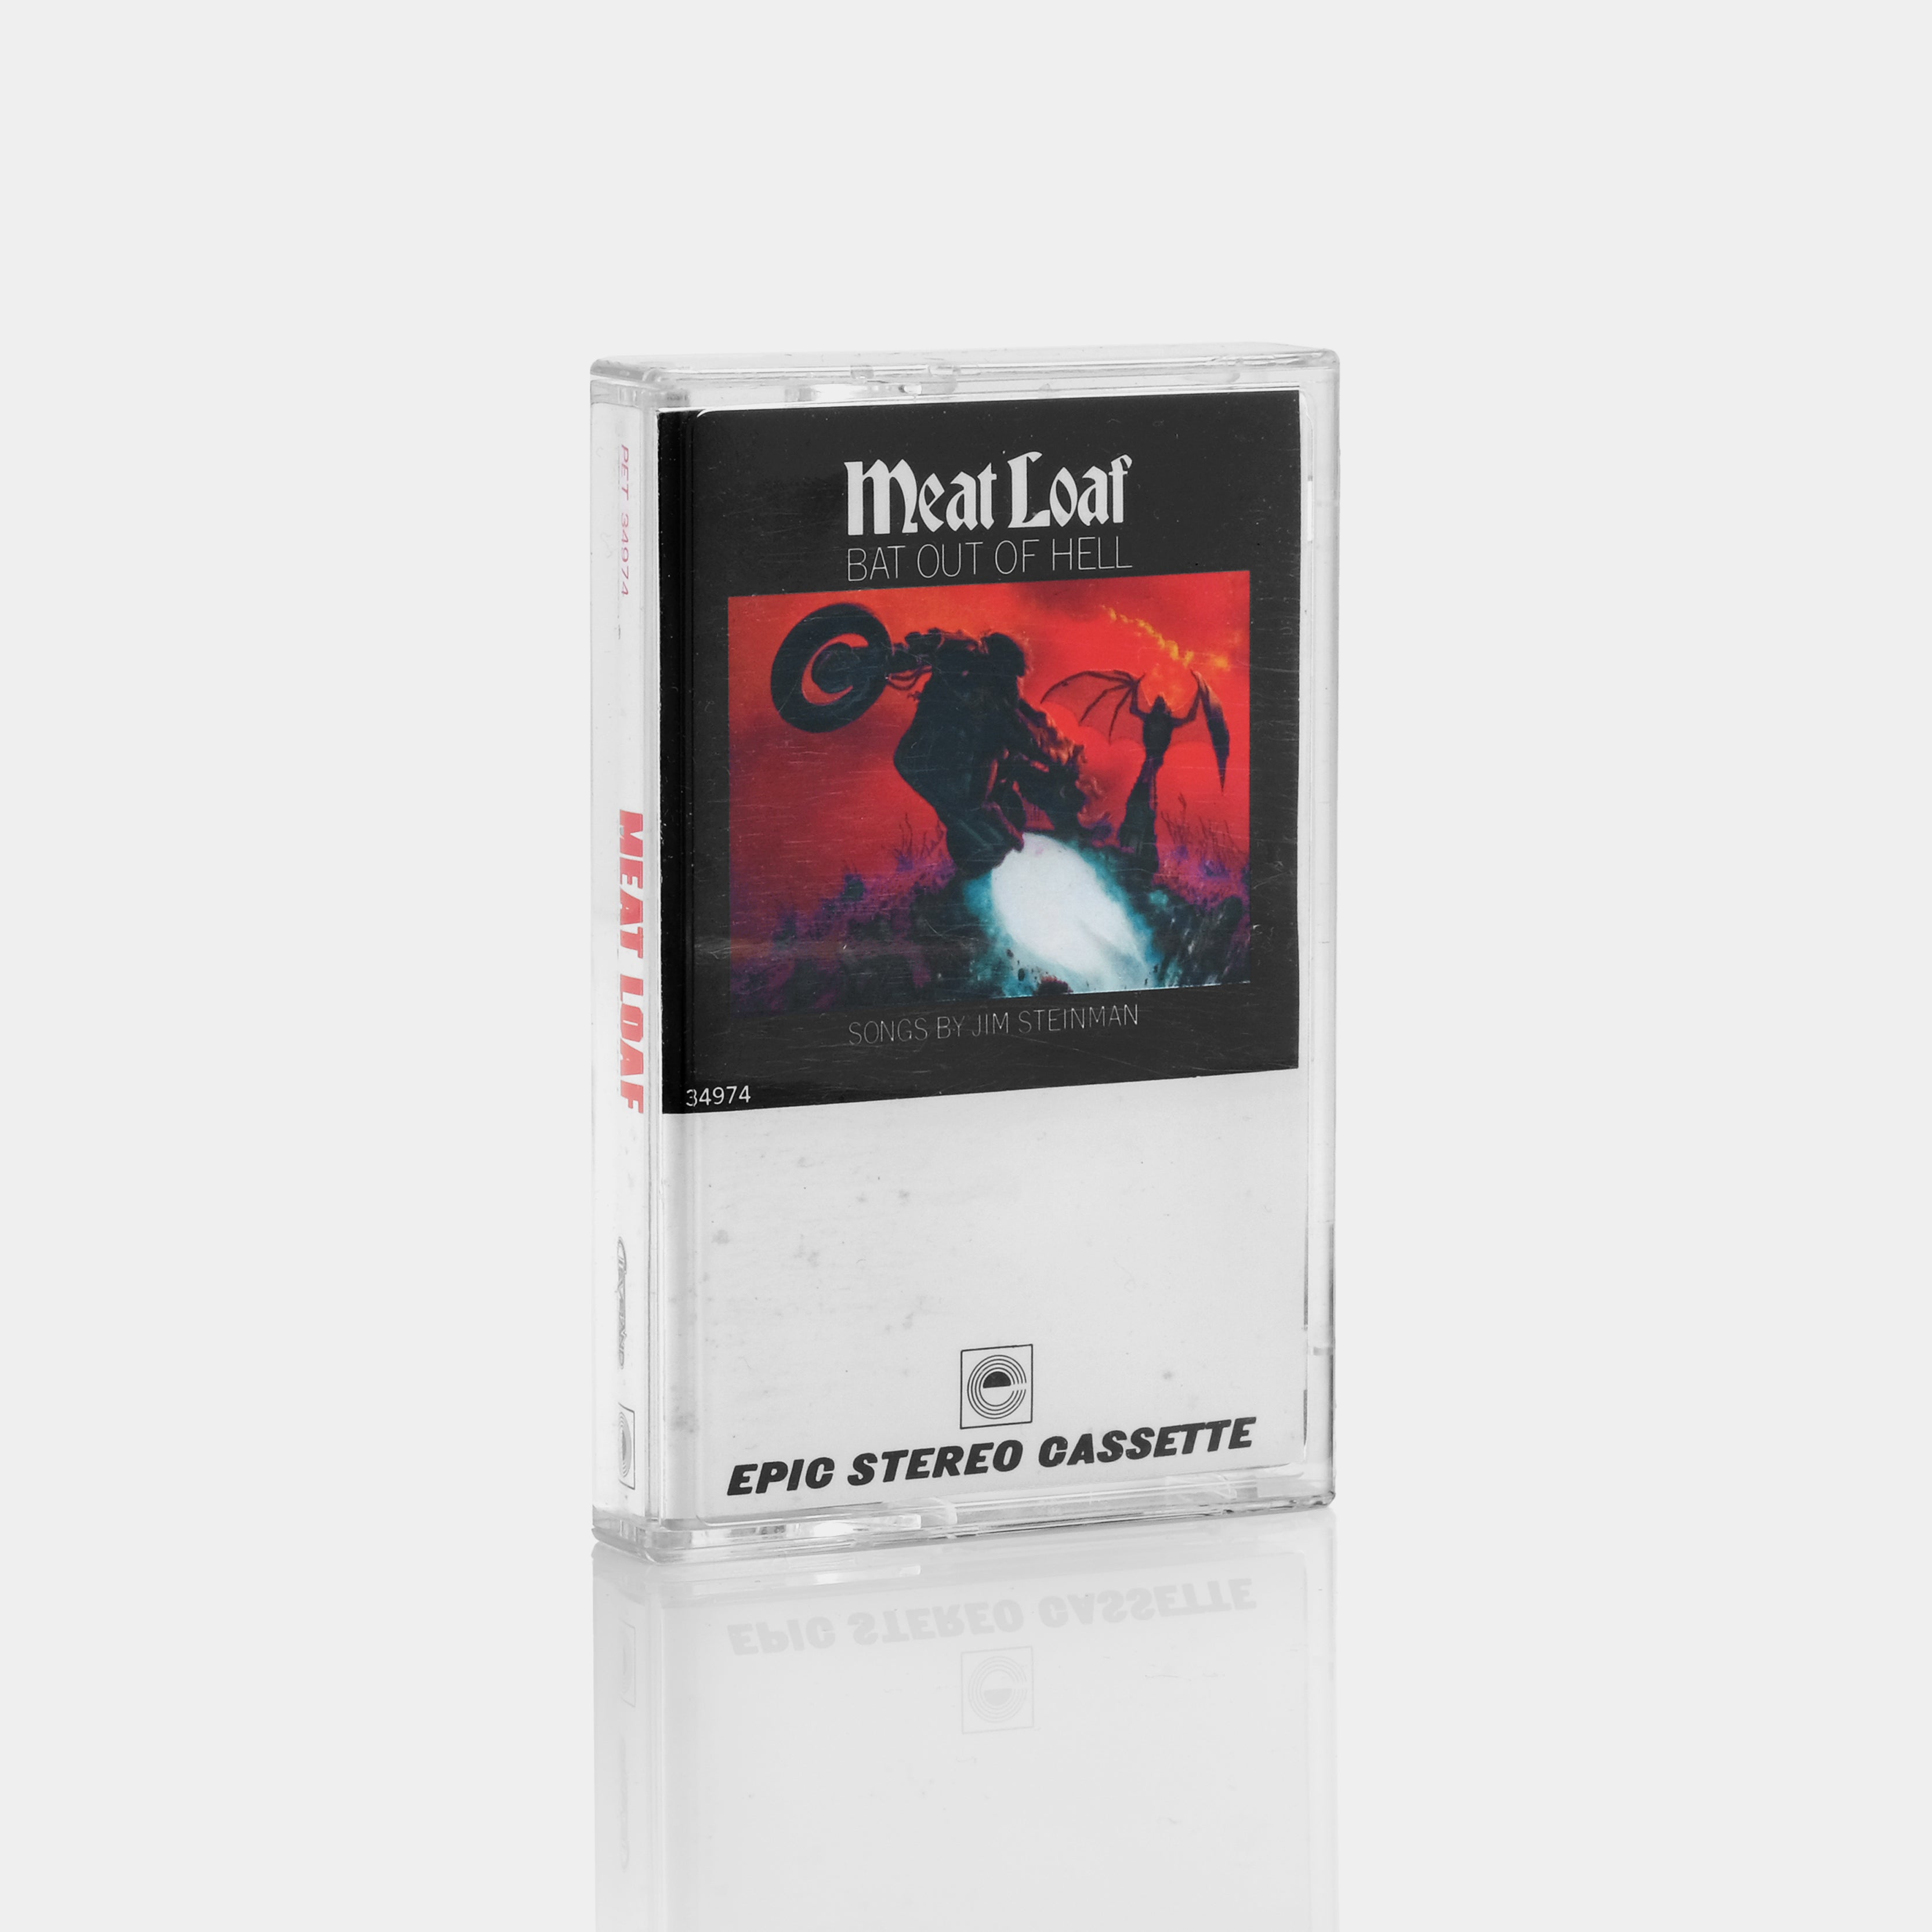 Meat Loaf - Bat Out Of Hell Cassette Tape